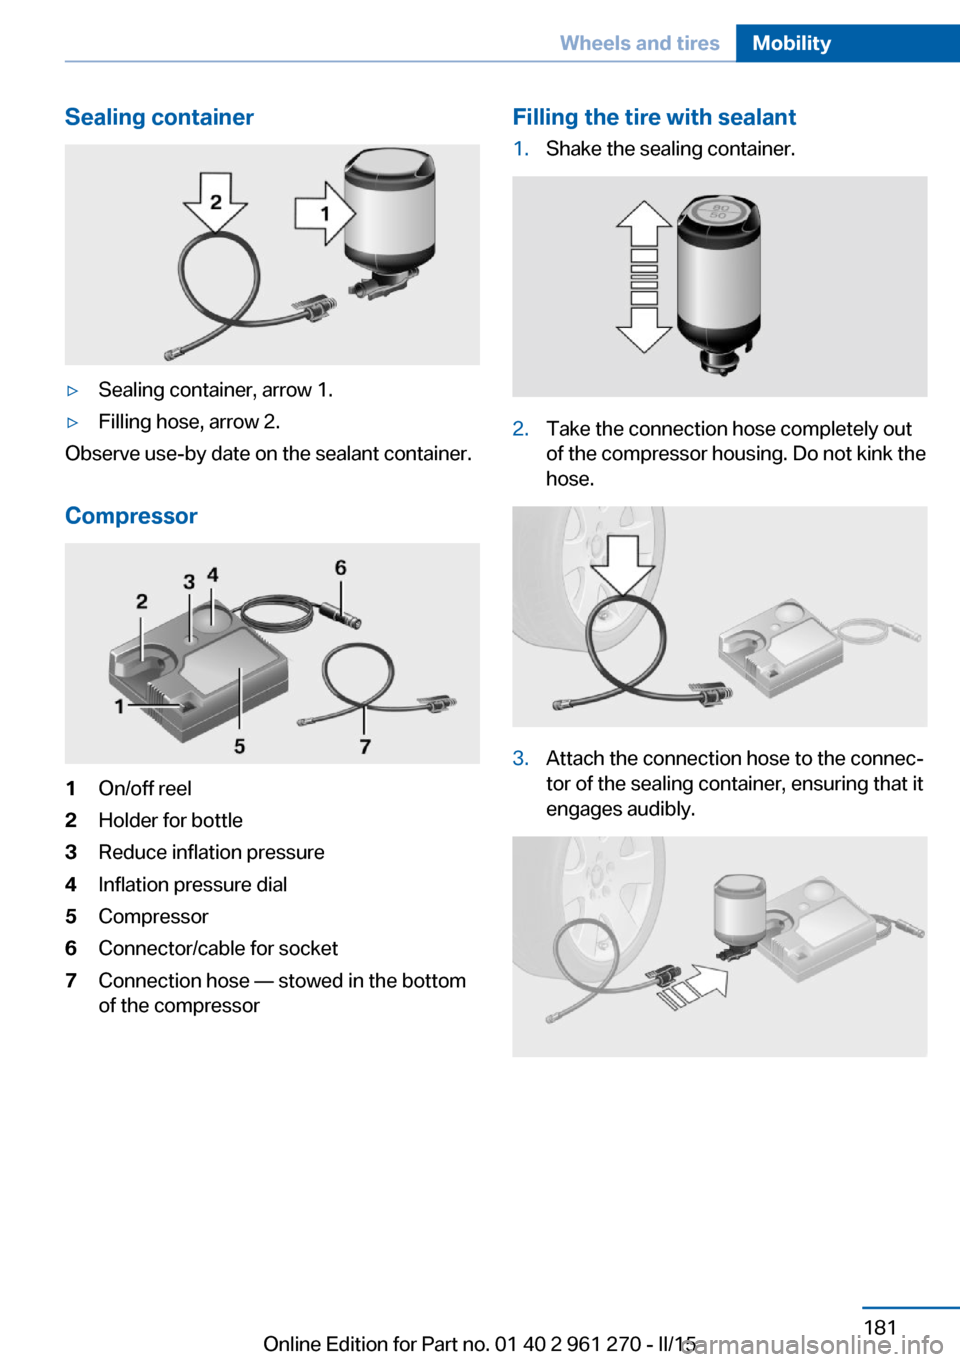 BMW 2 SERIES COUPE 2015 F22 User Guide Sealing container▷Sealing container, arrow 1.▷Filling hose, arrow 2.
Observe use-by date on the sealant container.
Compressor
1On/off reel2Holder for bottle3Reduce inflation pressure4Inflation pre